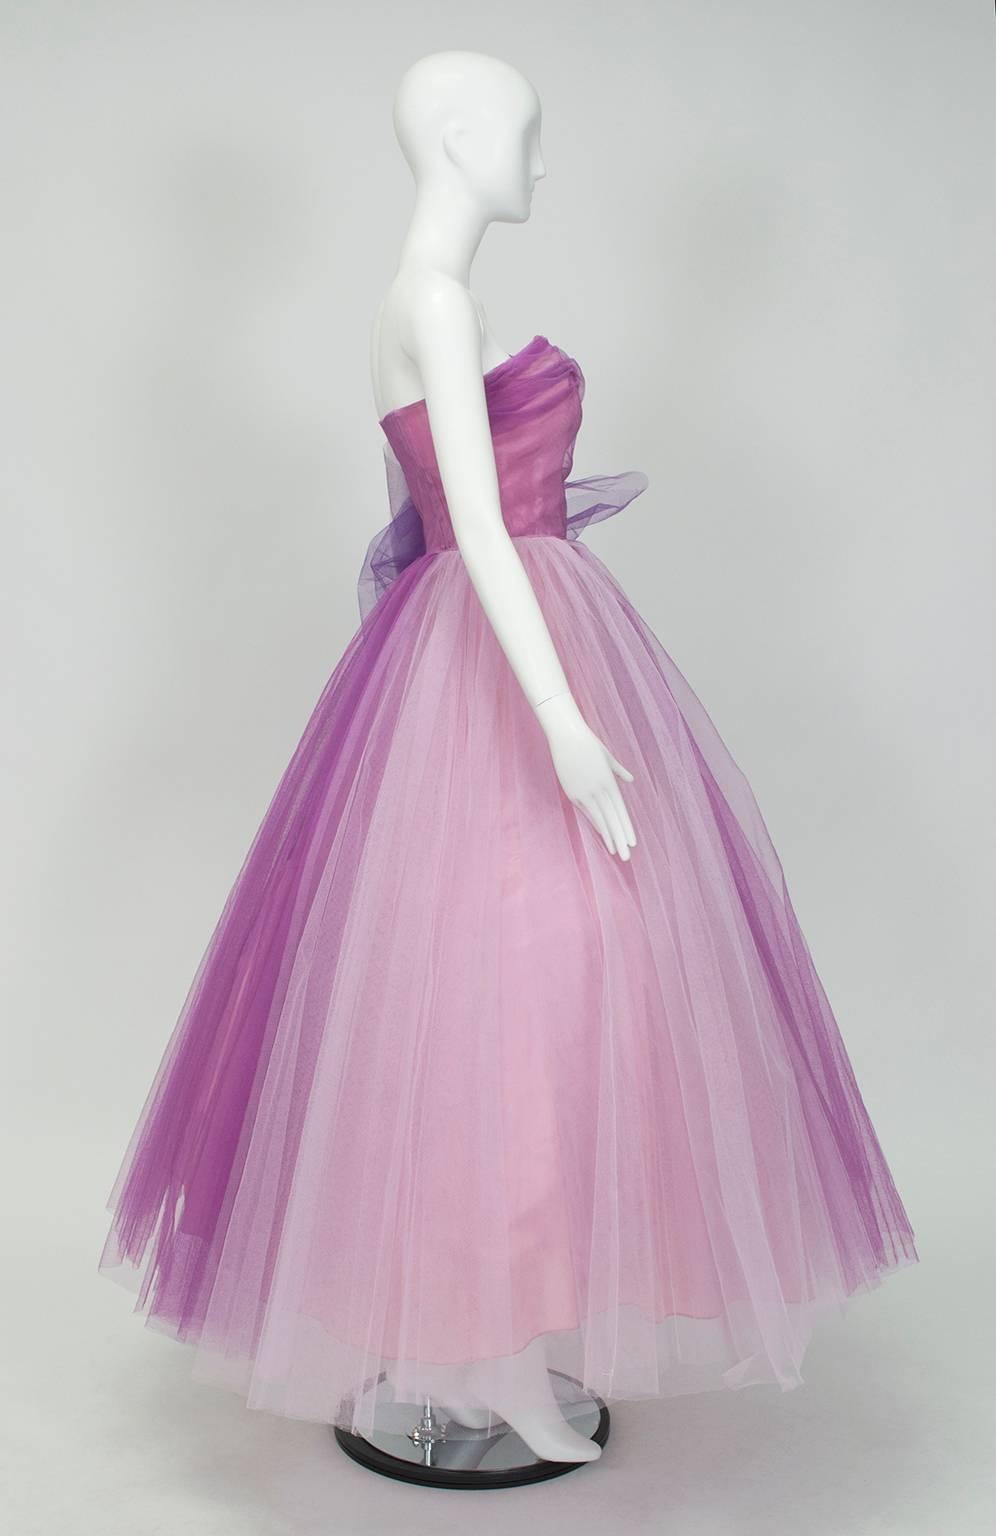 No shrinking violets here: with three shades of regal purple and a strapless ruched bodice, this gown is positively guaranteed to attract attention (as will the nearly 8-foot wide skirt)!

Strapless ball gown with ruched sweetheart surplice bodice